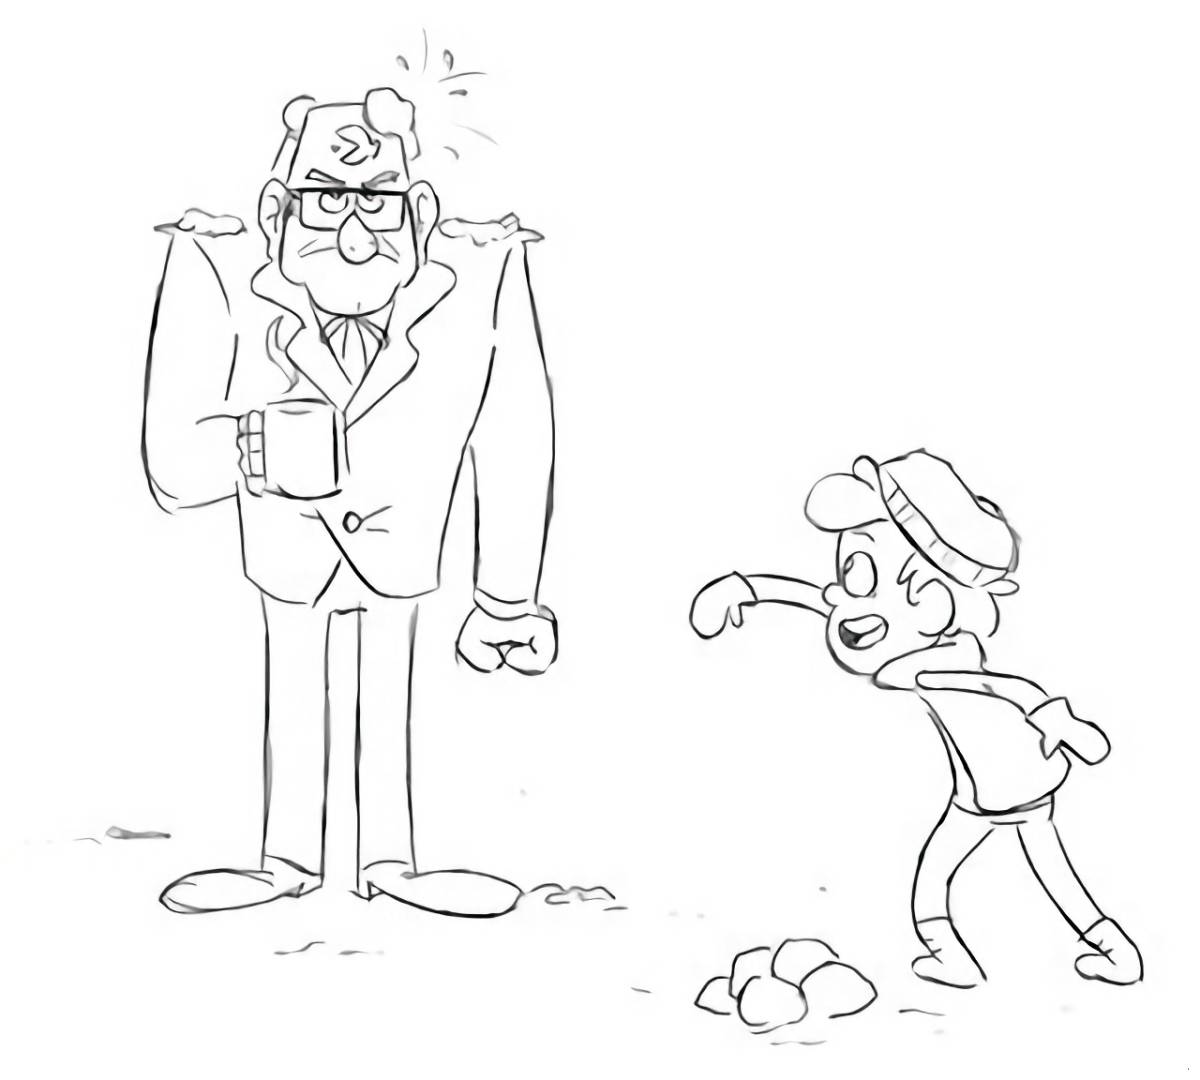 Stan and dipper